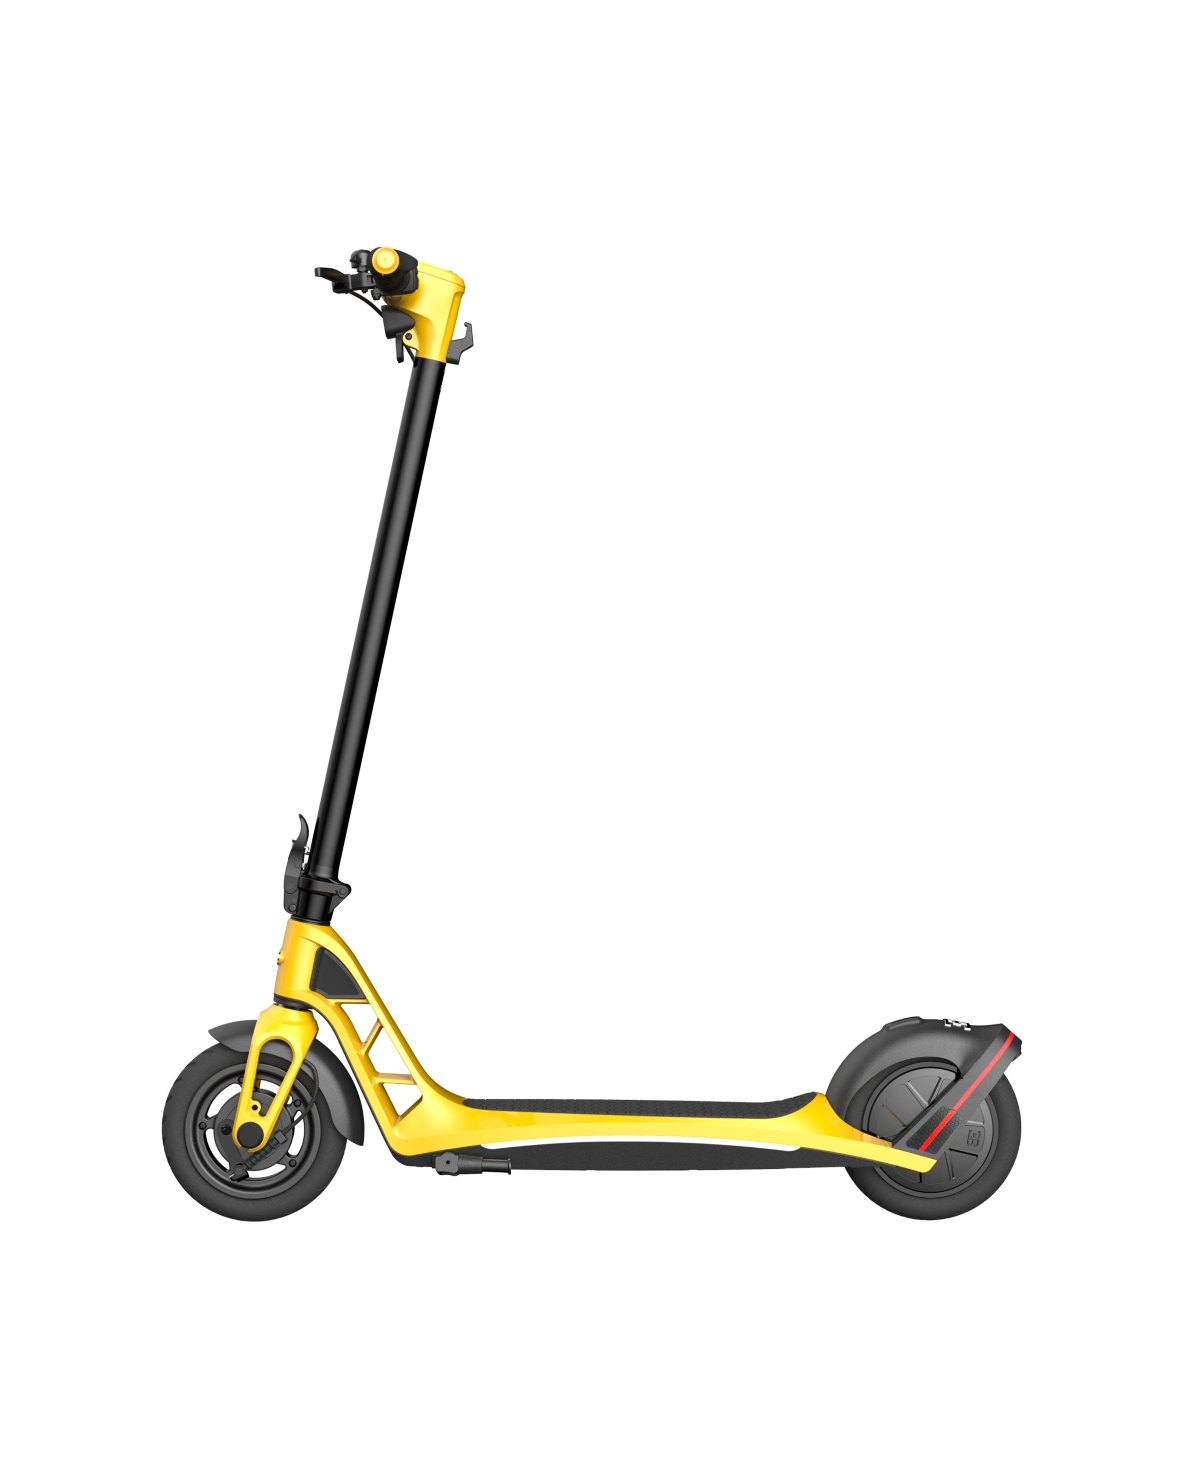 Bugatti 09 Electric Ride On Scooter In Yellow